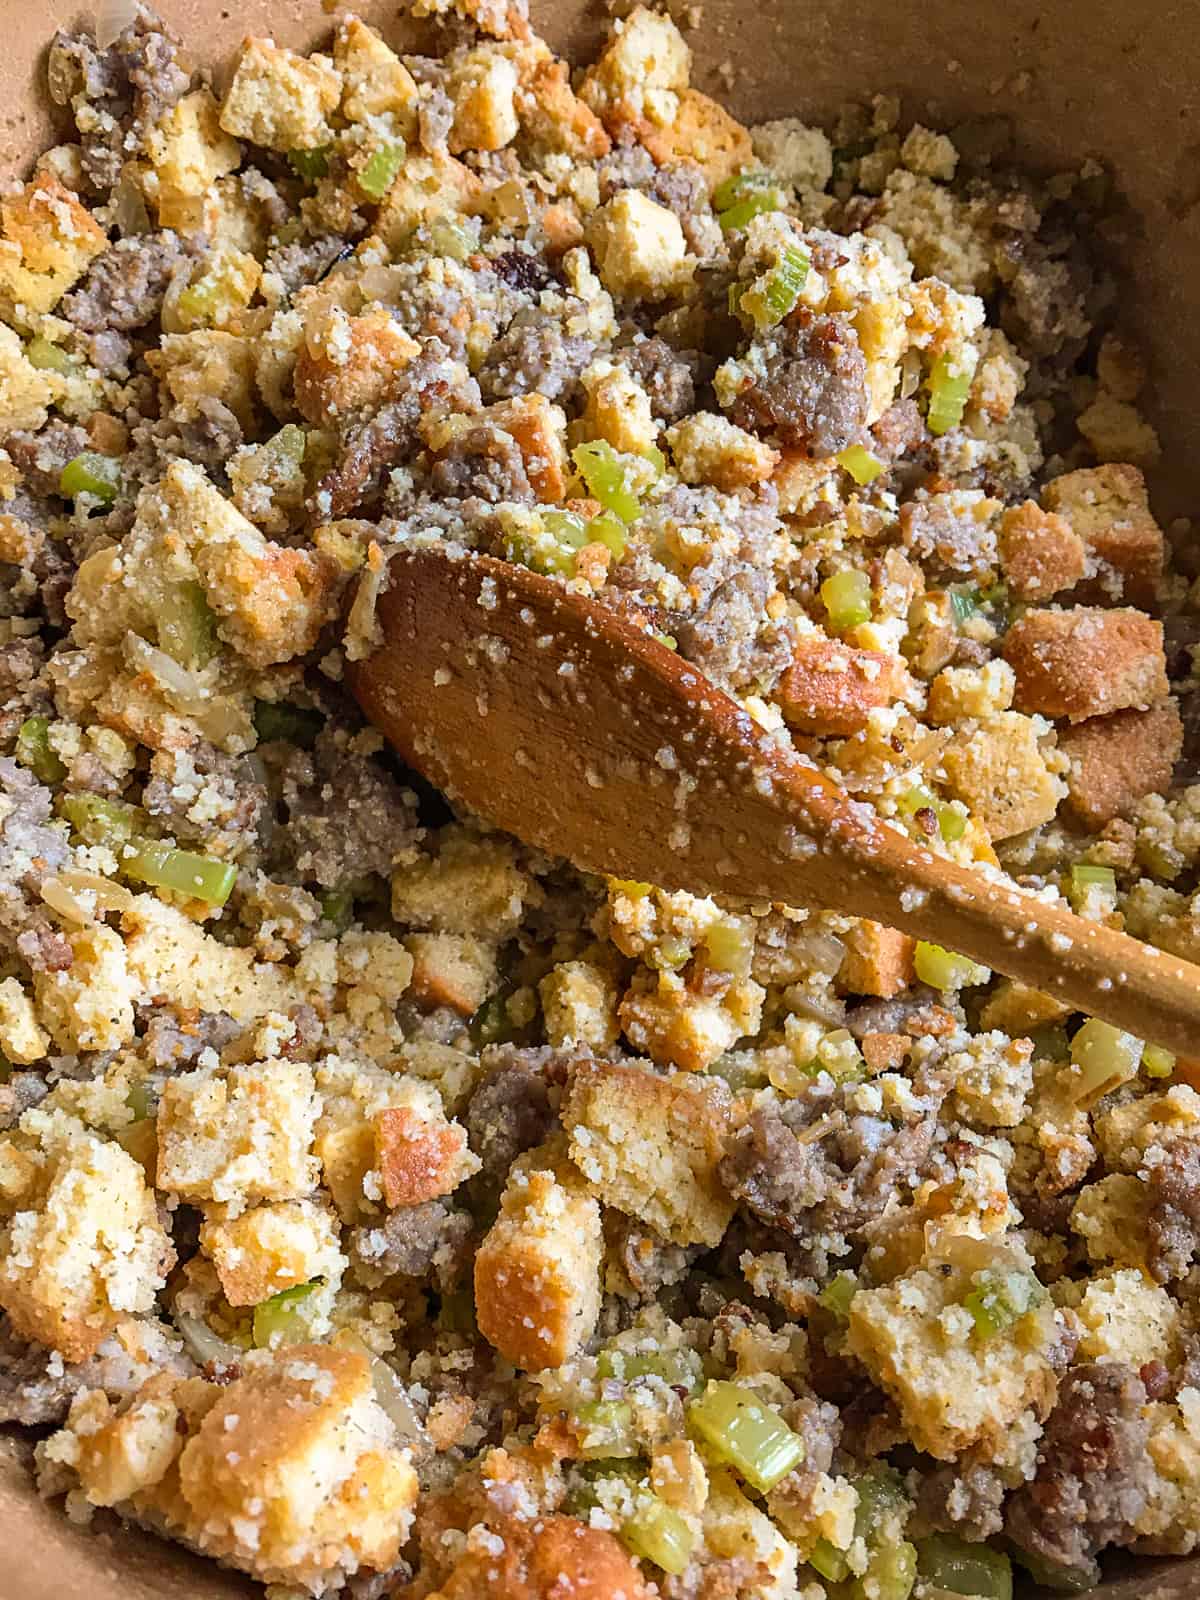 Gluten-free cornbread stuffing being mixed in a bowl with a wooden spoon.